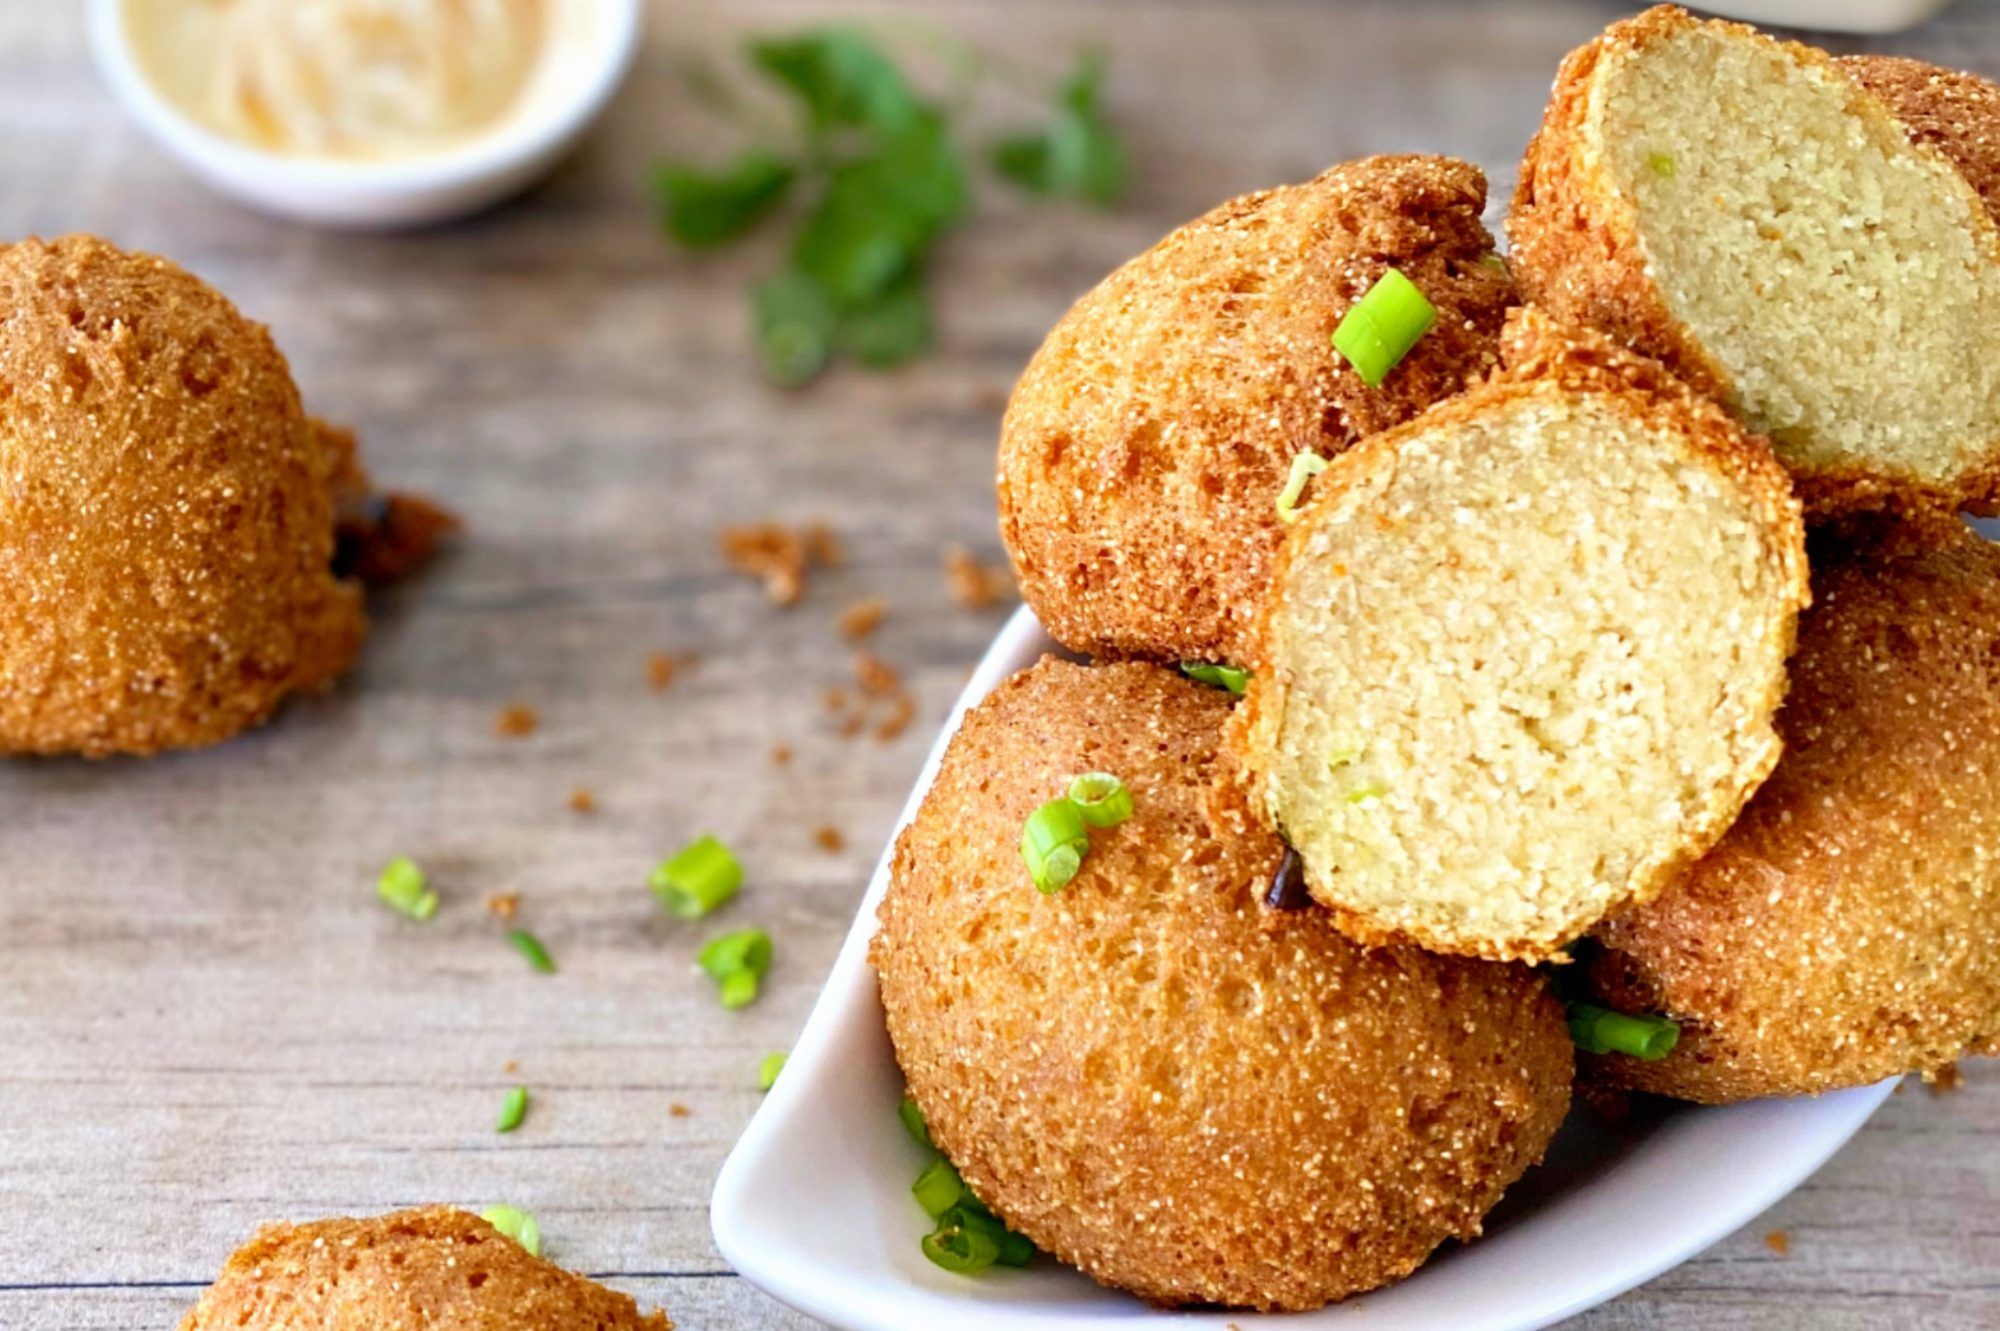 Maize Meal Hush Puppies